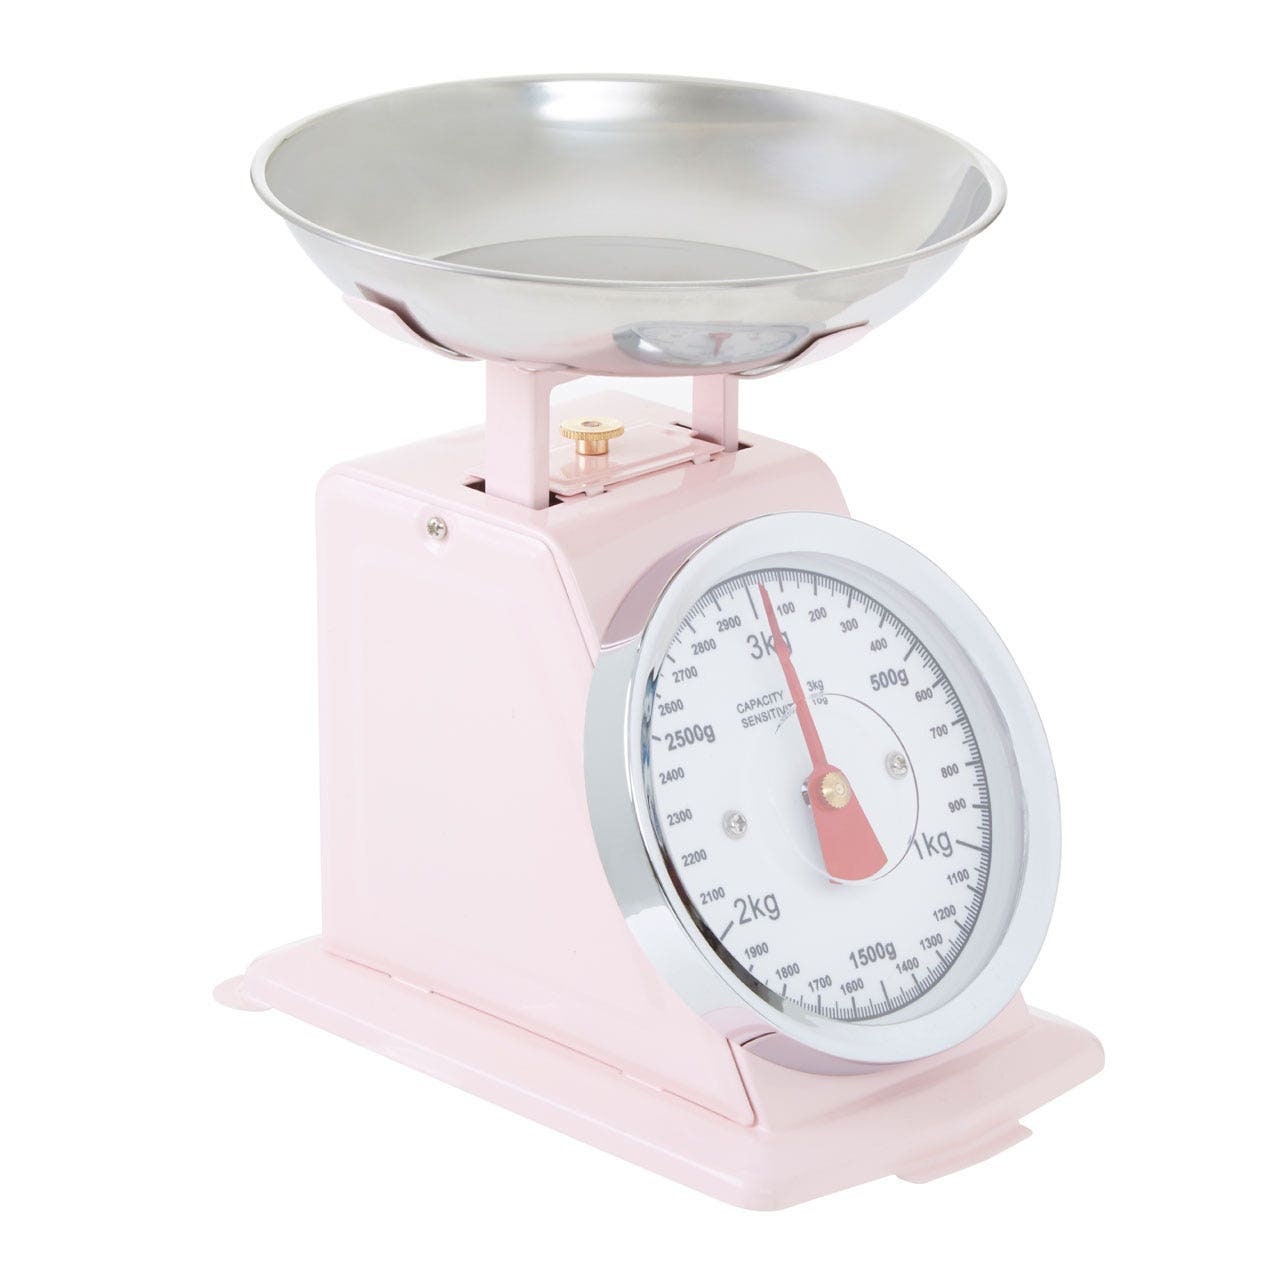 Compact Chrome Kitchen Weighing Scale 3kg Measurement Cooking Baking Gadget  Grams Kilograms Pounds Metric Imperial Mechanical Kitchenware 